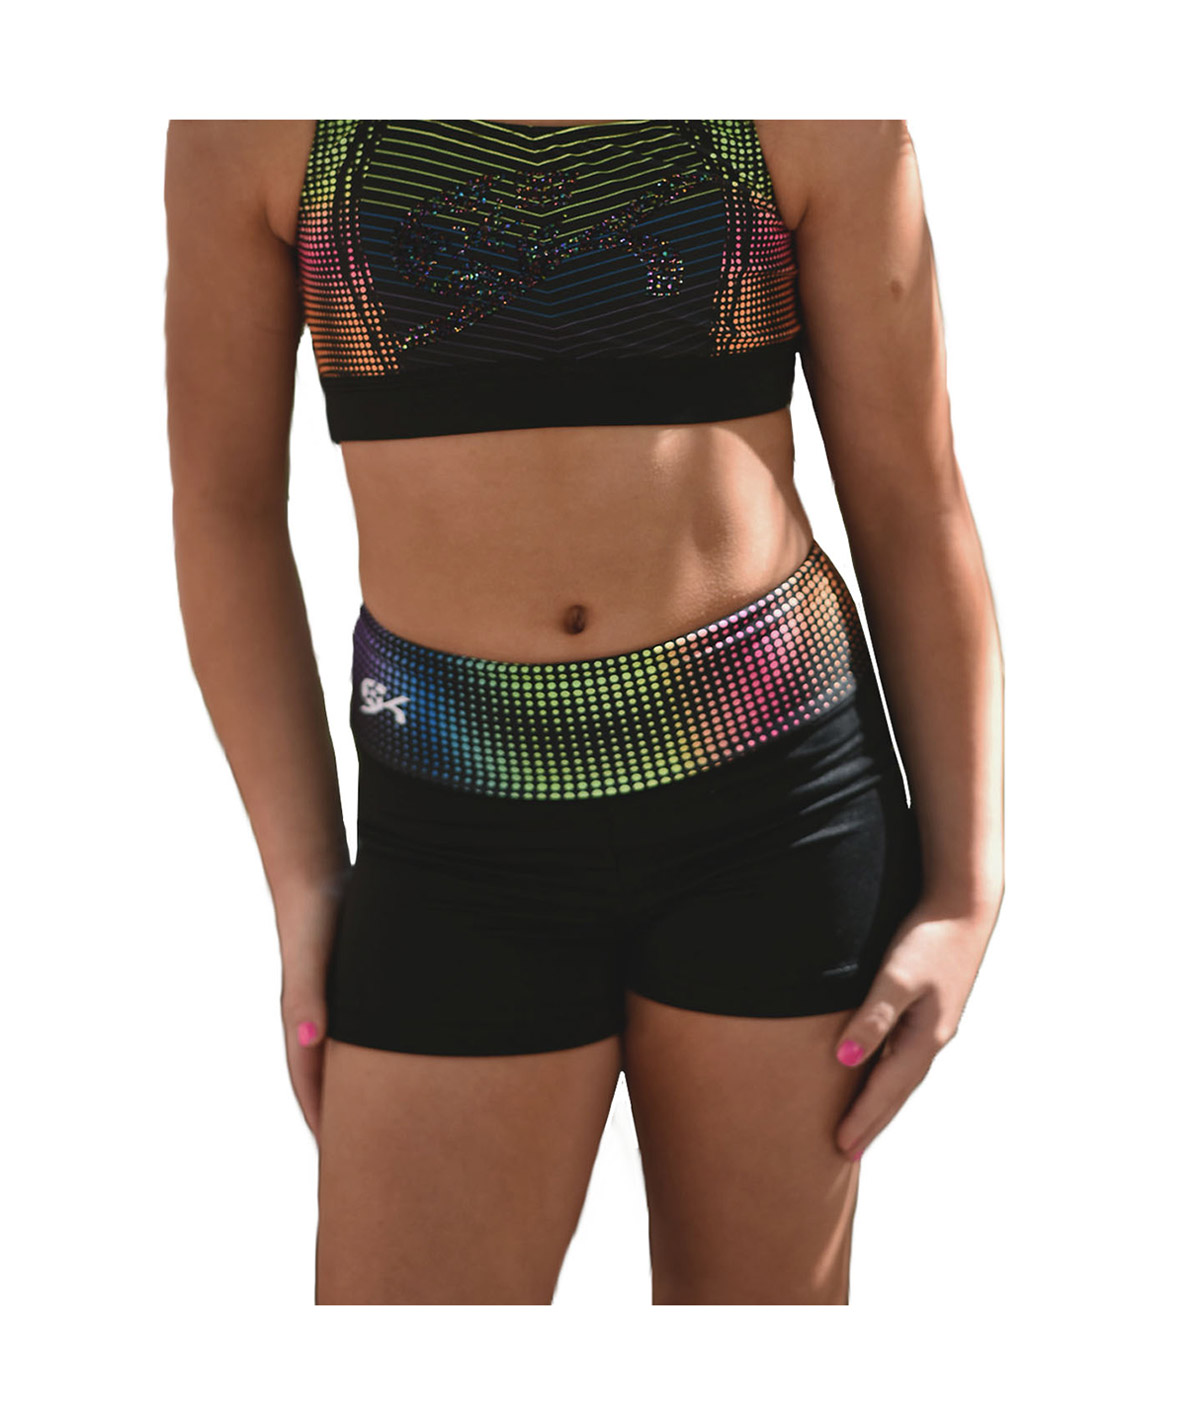 GK All Star Live Life in Color - High-Waisted Short